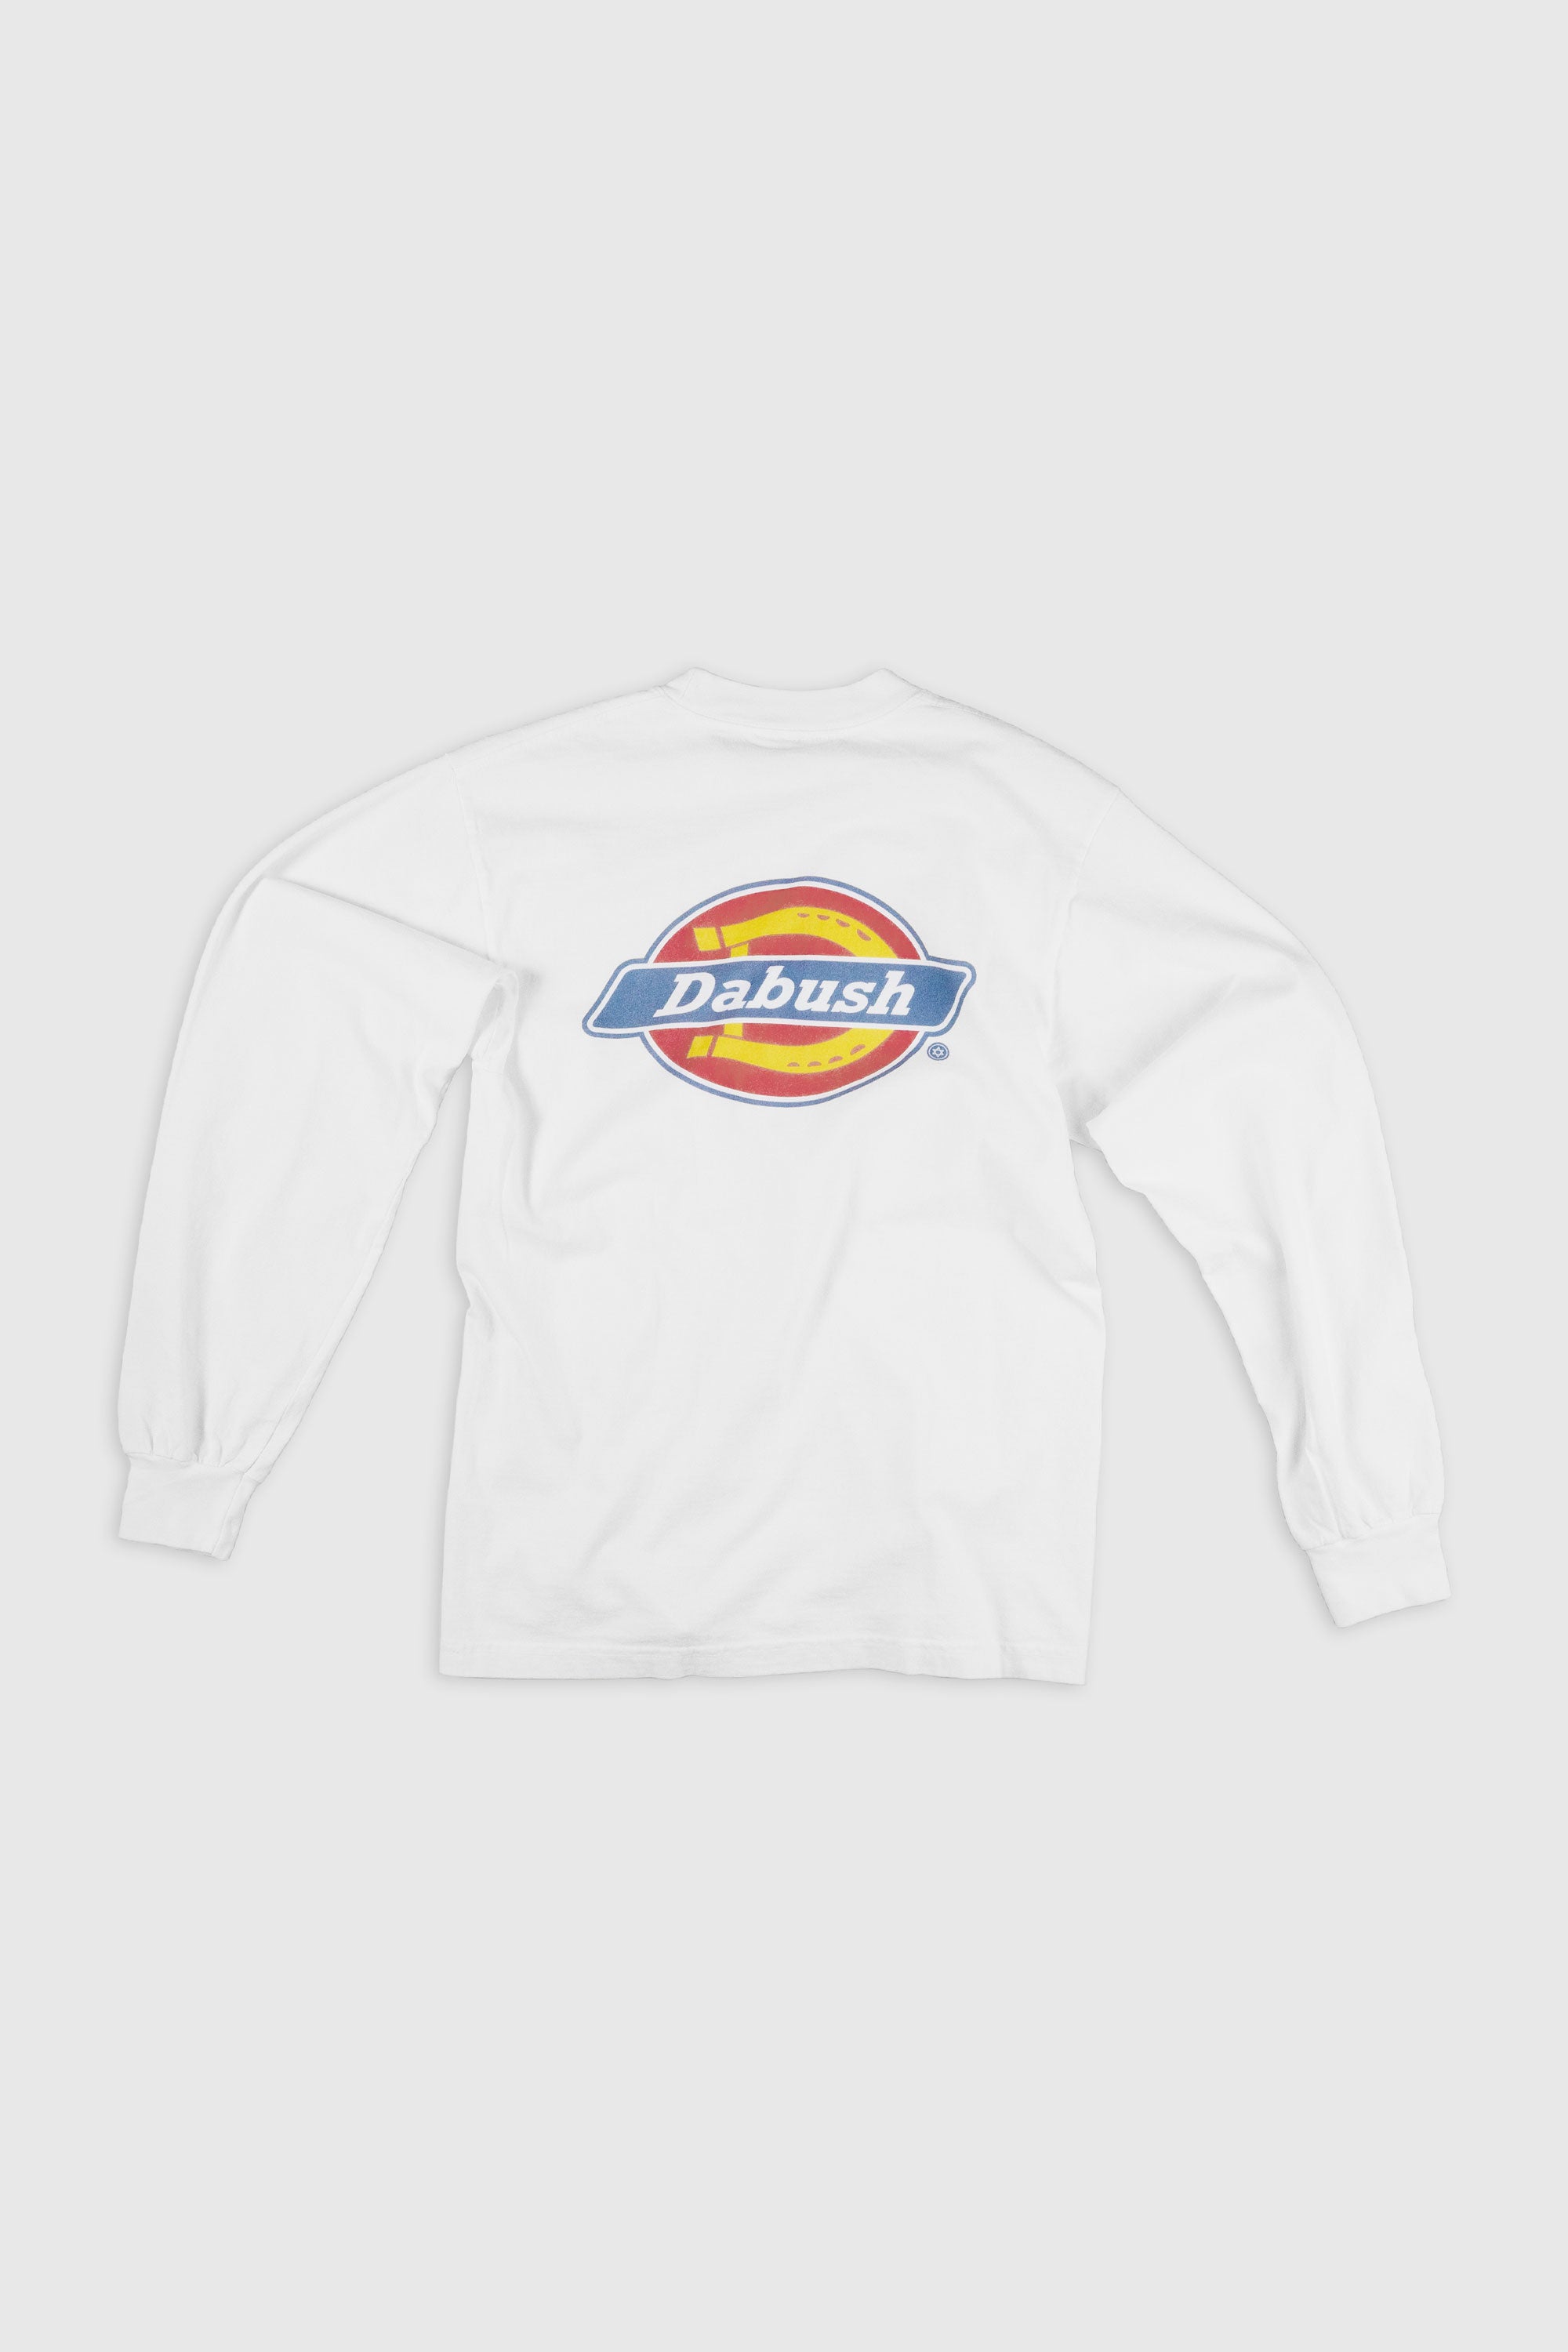 DABUSH LONG SLEEVE T-SHIRT. 100% Cotton, oversized long sleeves tee with front and back print. Made in Tel aviv. Shop and view the latest Drops from the official DABUSH website. Worldwide Shipping.